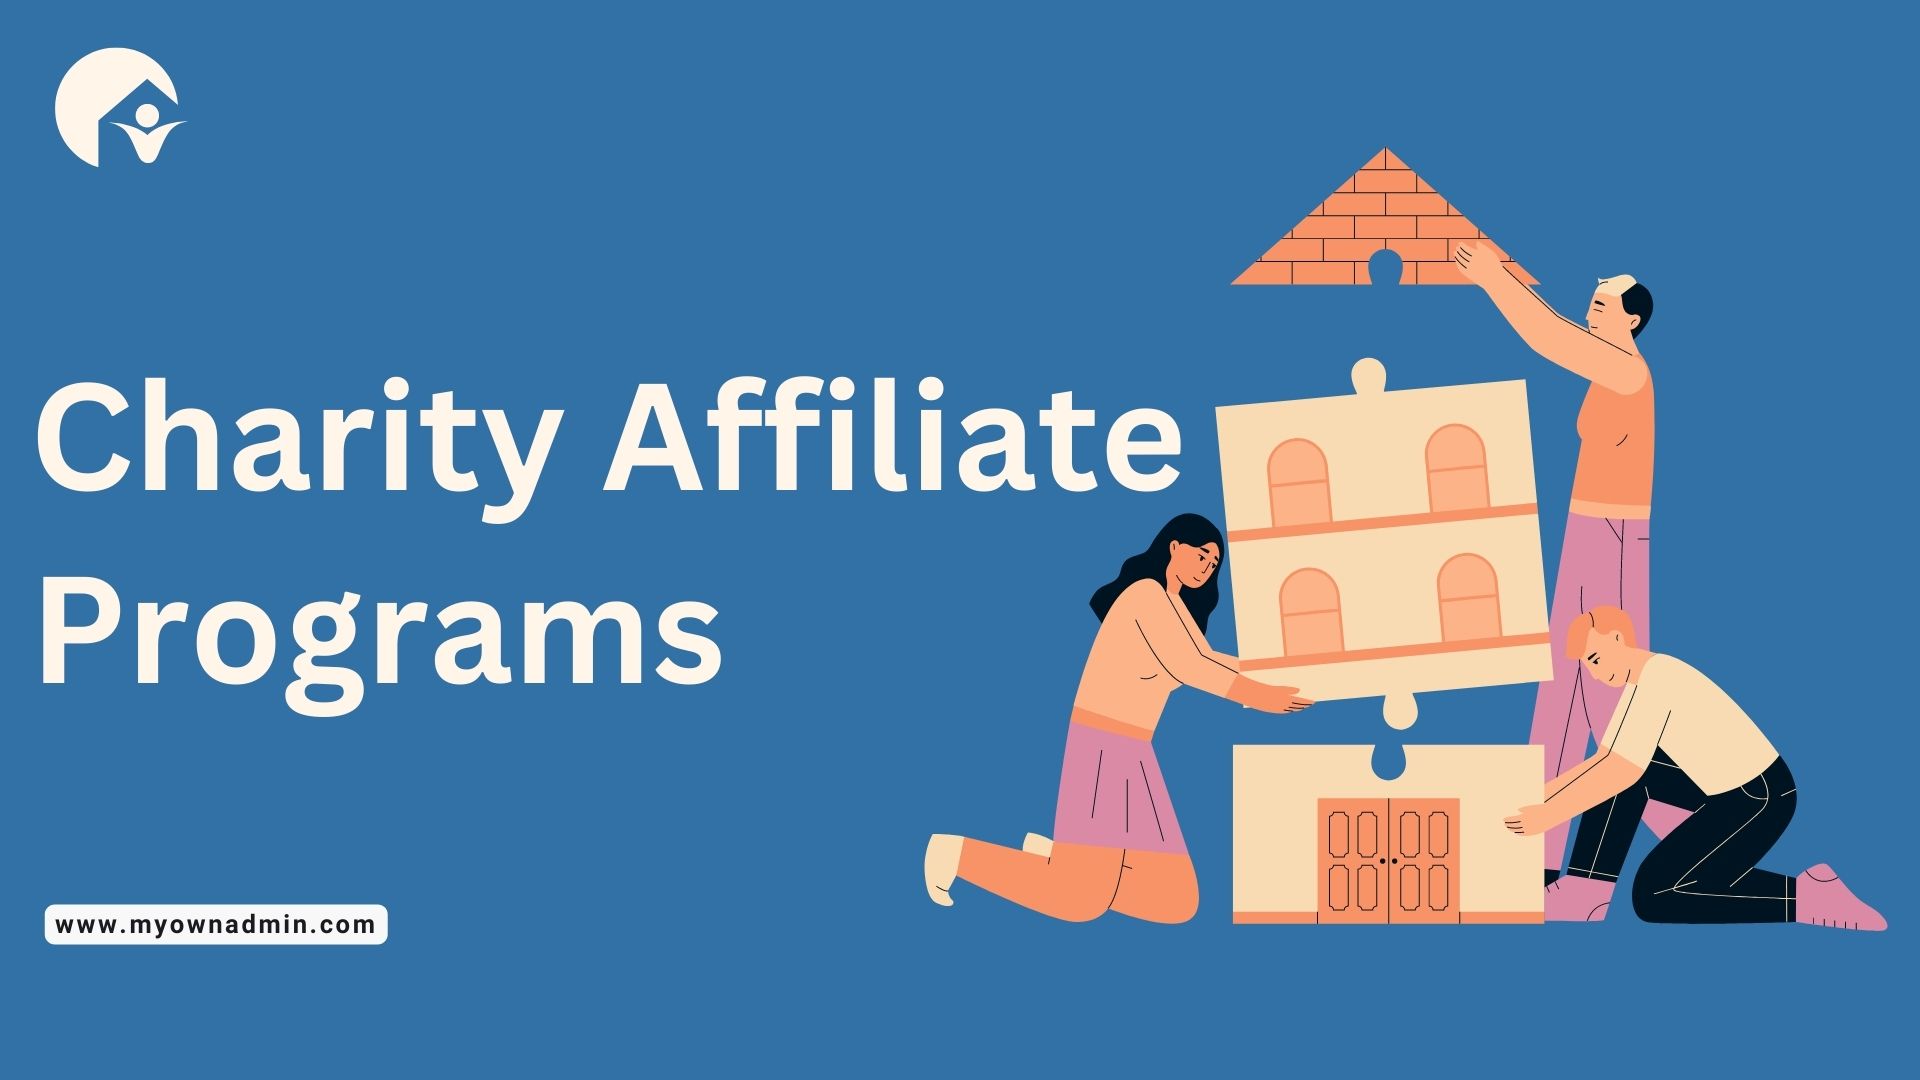 Charity Affiliate Programs